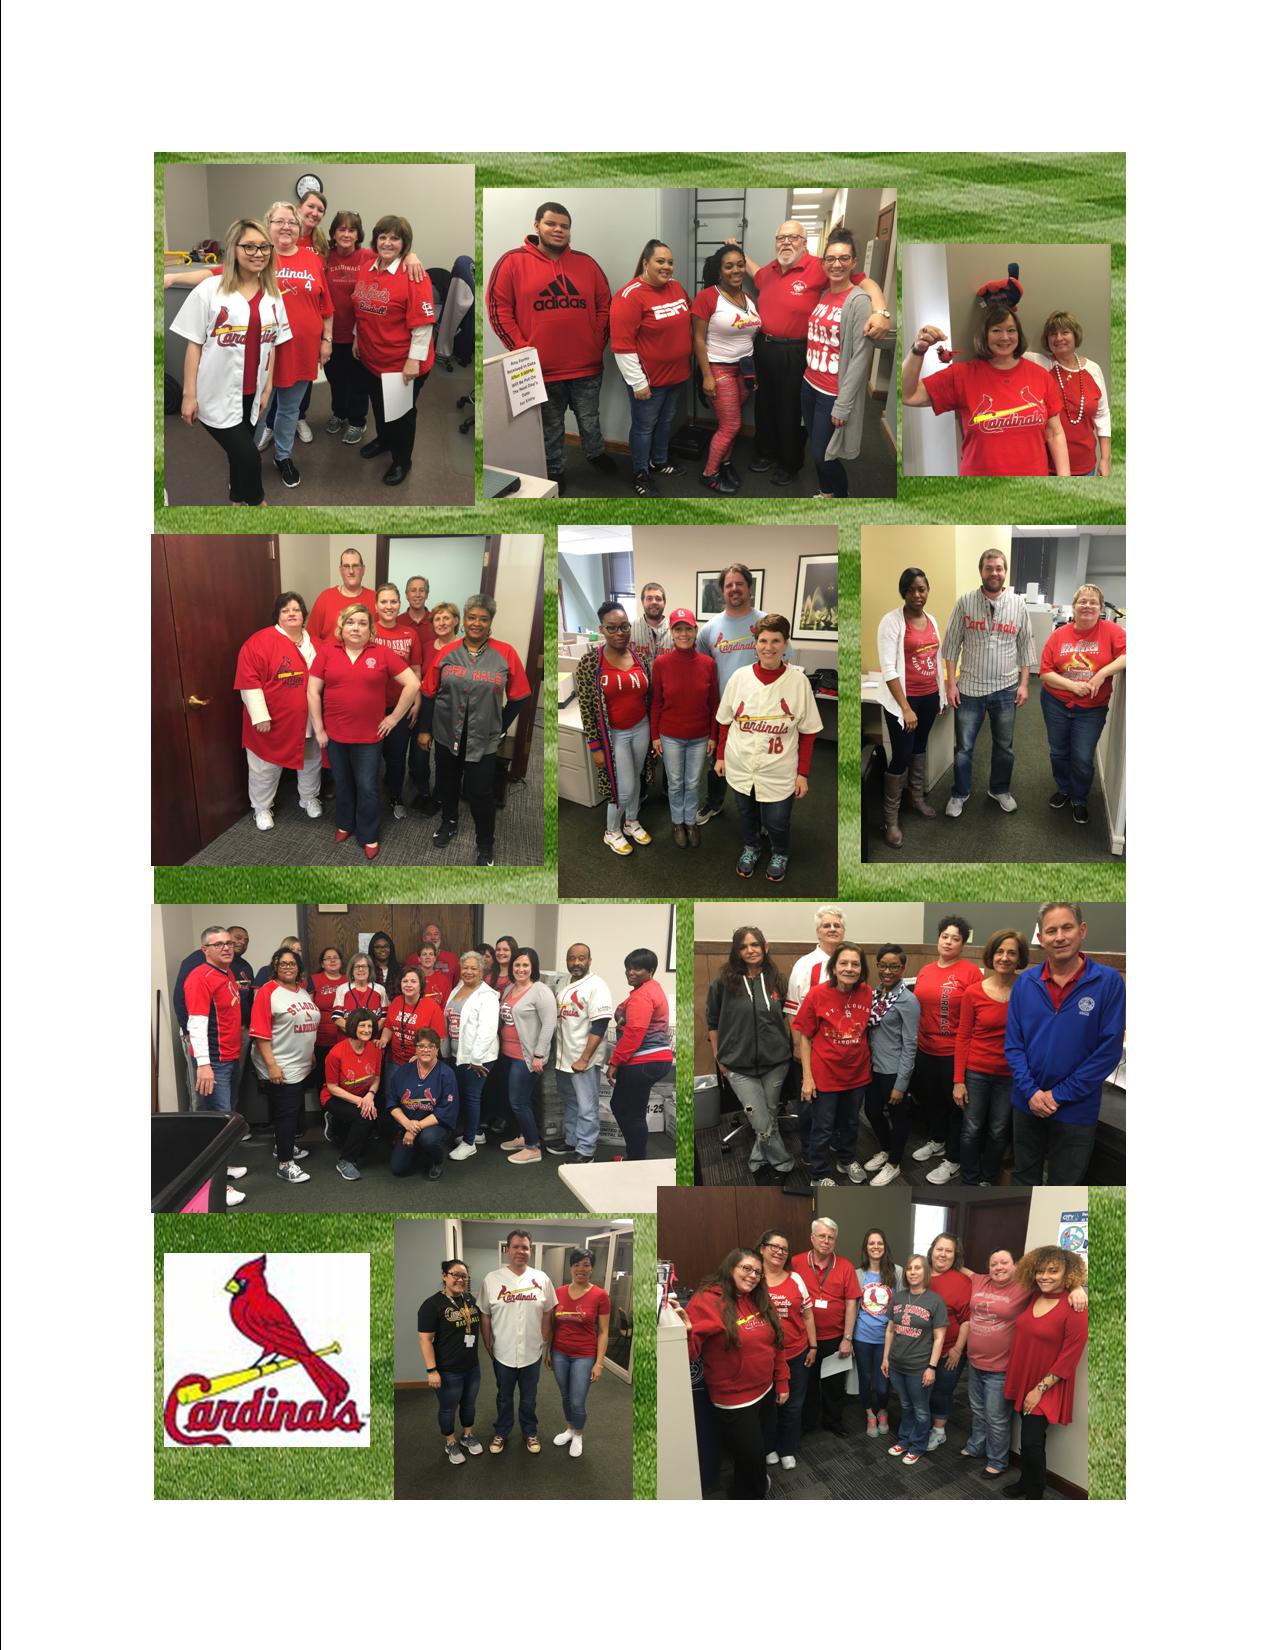 COR employees celebrated Opening Day on April 5, 2018 by wearing Cardinal Red.